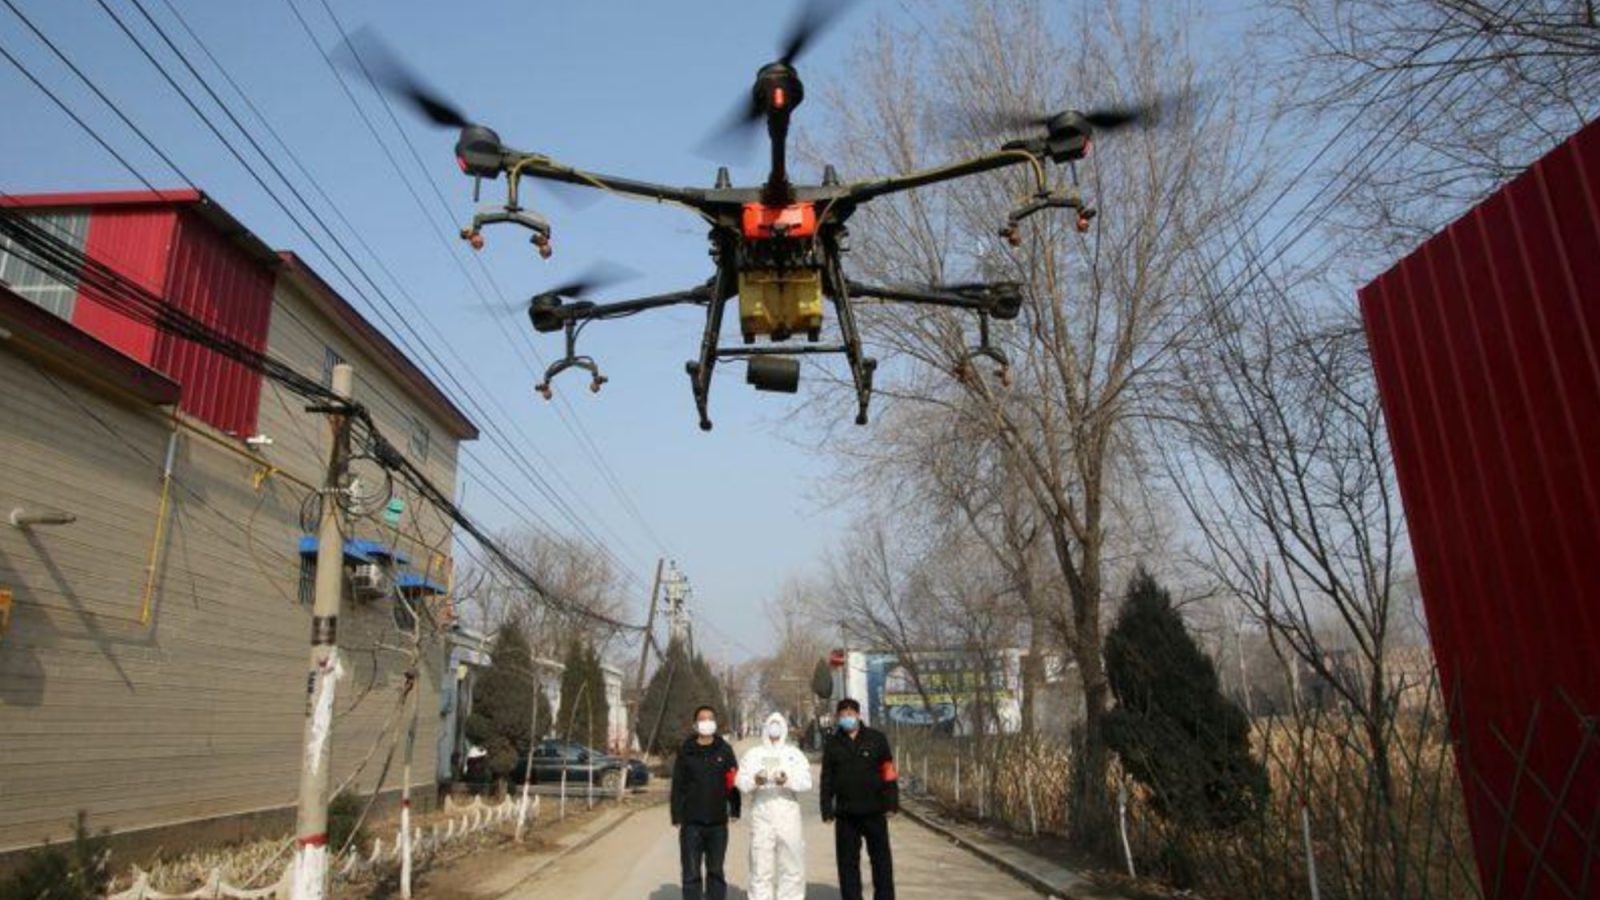 Coronavirus may be a boost for deliveries by drone